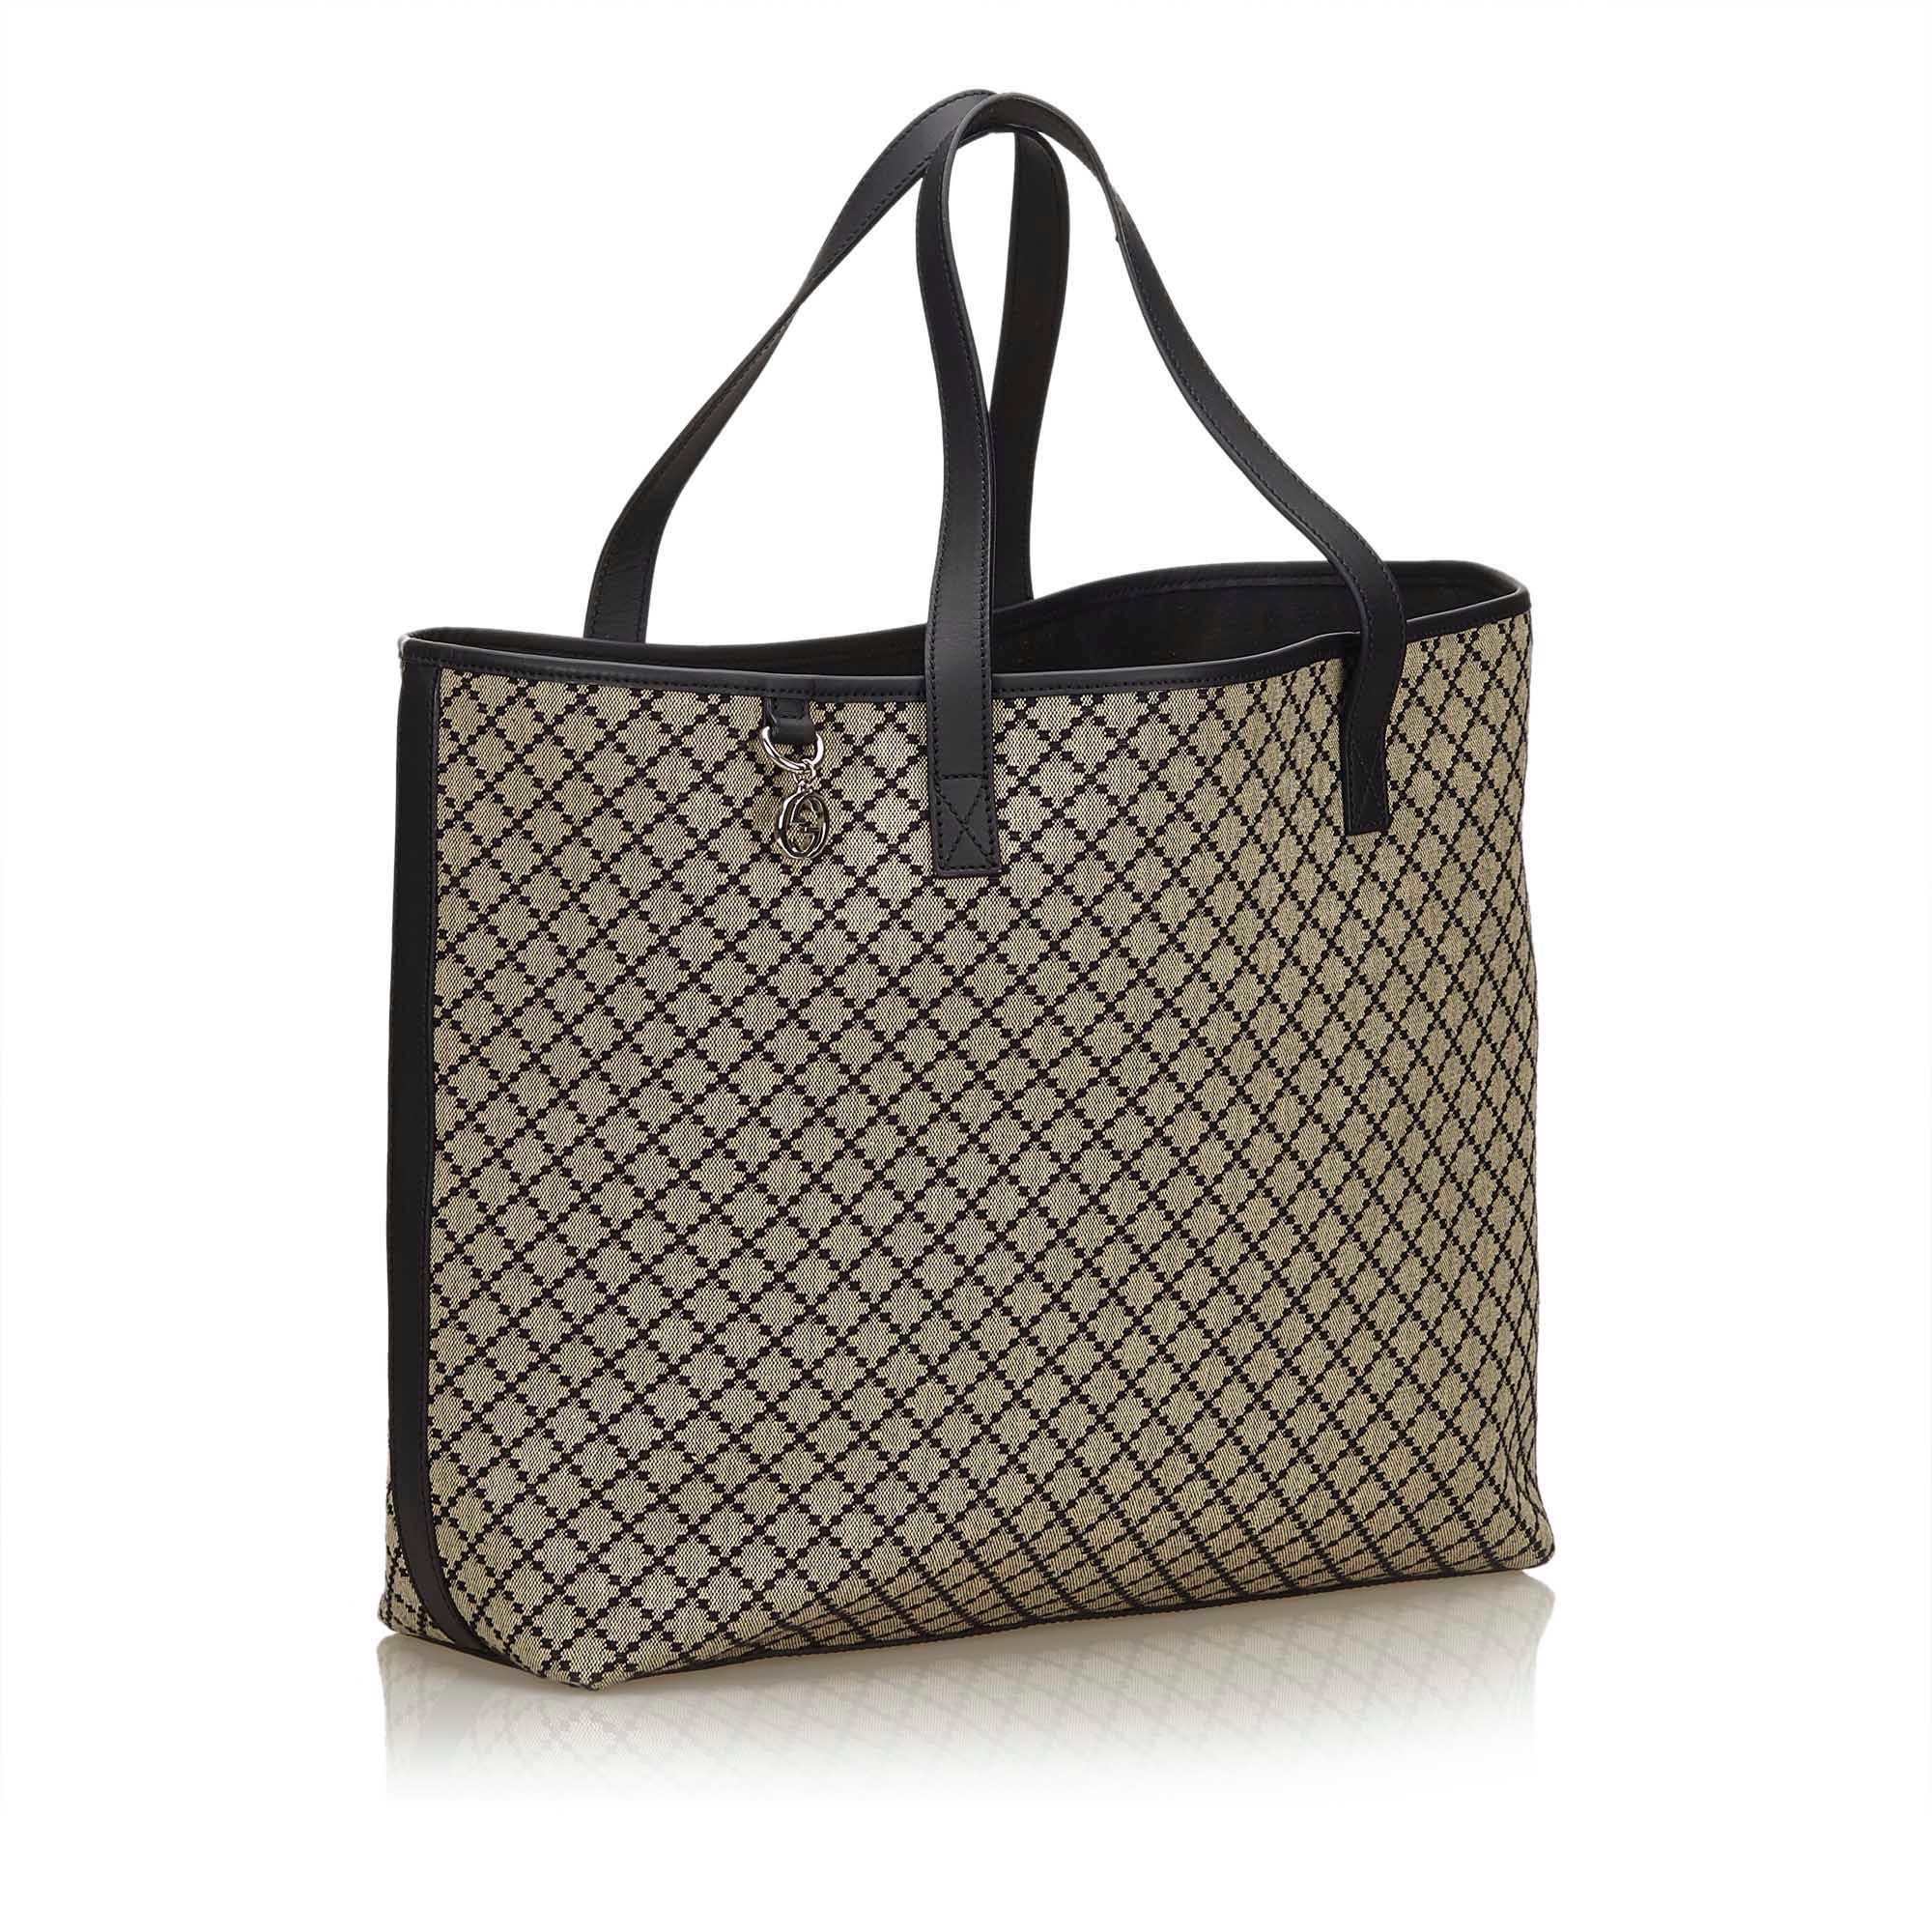 This tote bag features a jacquard body, flat leather straps open top, and an interior zip pocket. It carries as A condition rating.

Inclusions: 
This item does not come with inclusions.

Dimensions:
Length: 33.00 cm
Width: 37.00 cm
Depth: 12.00